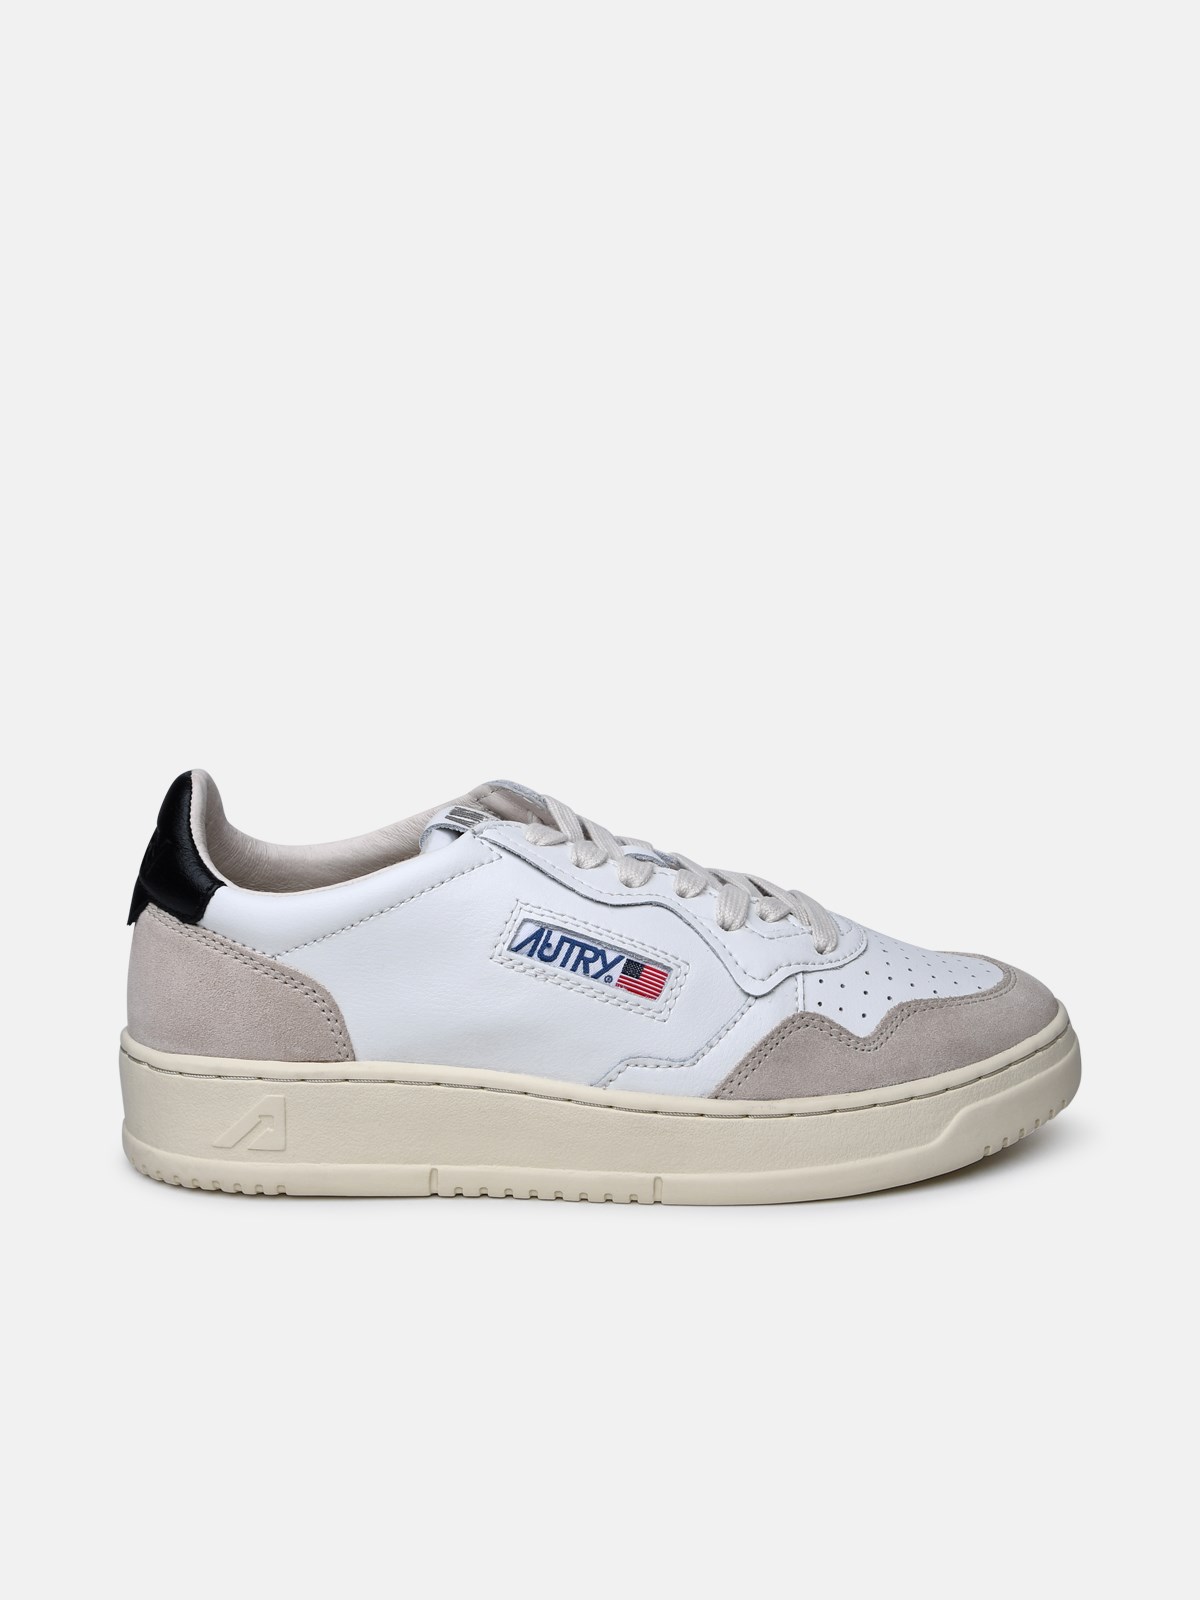 Autry White Leather Sneakers